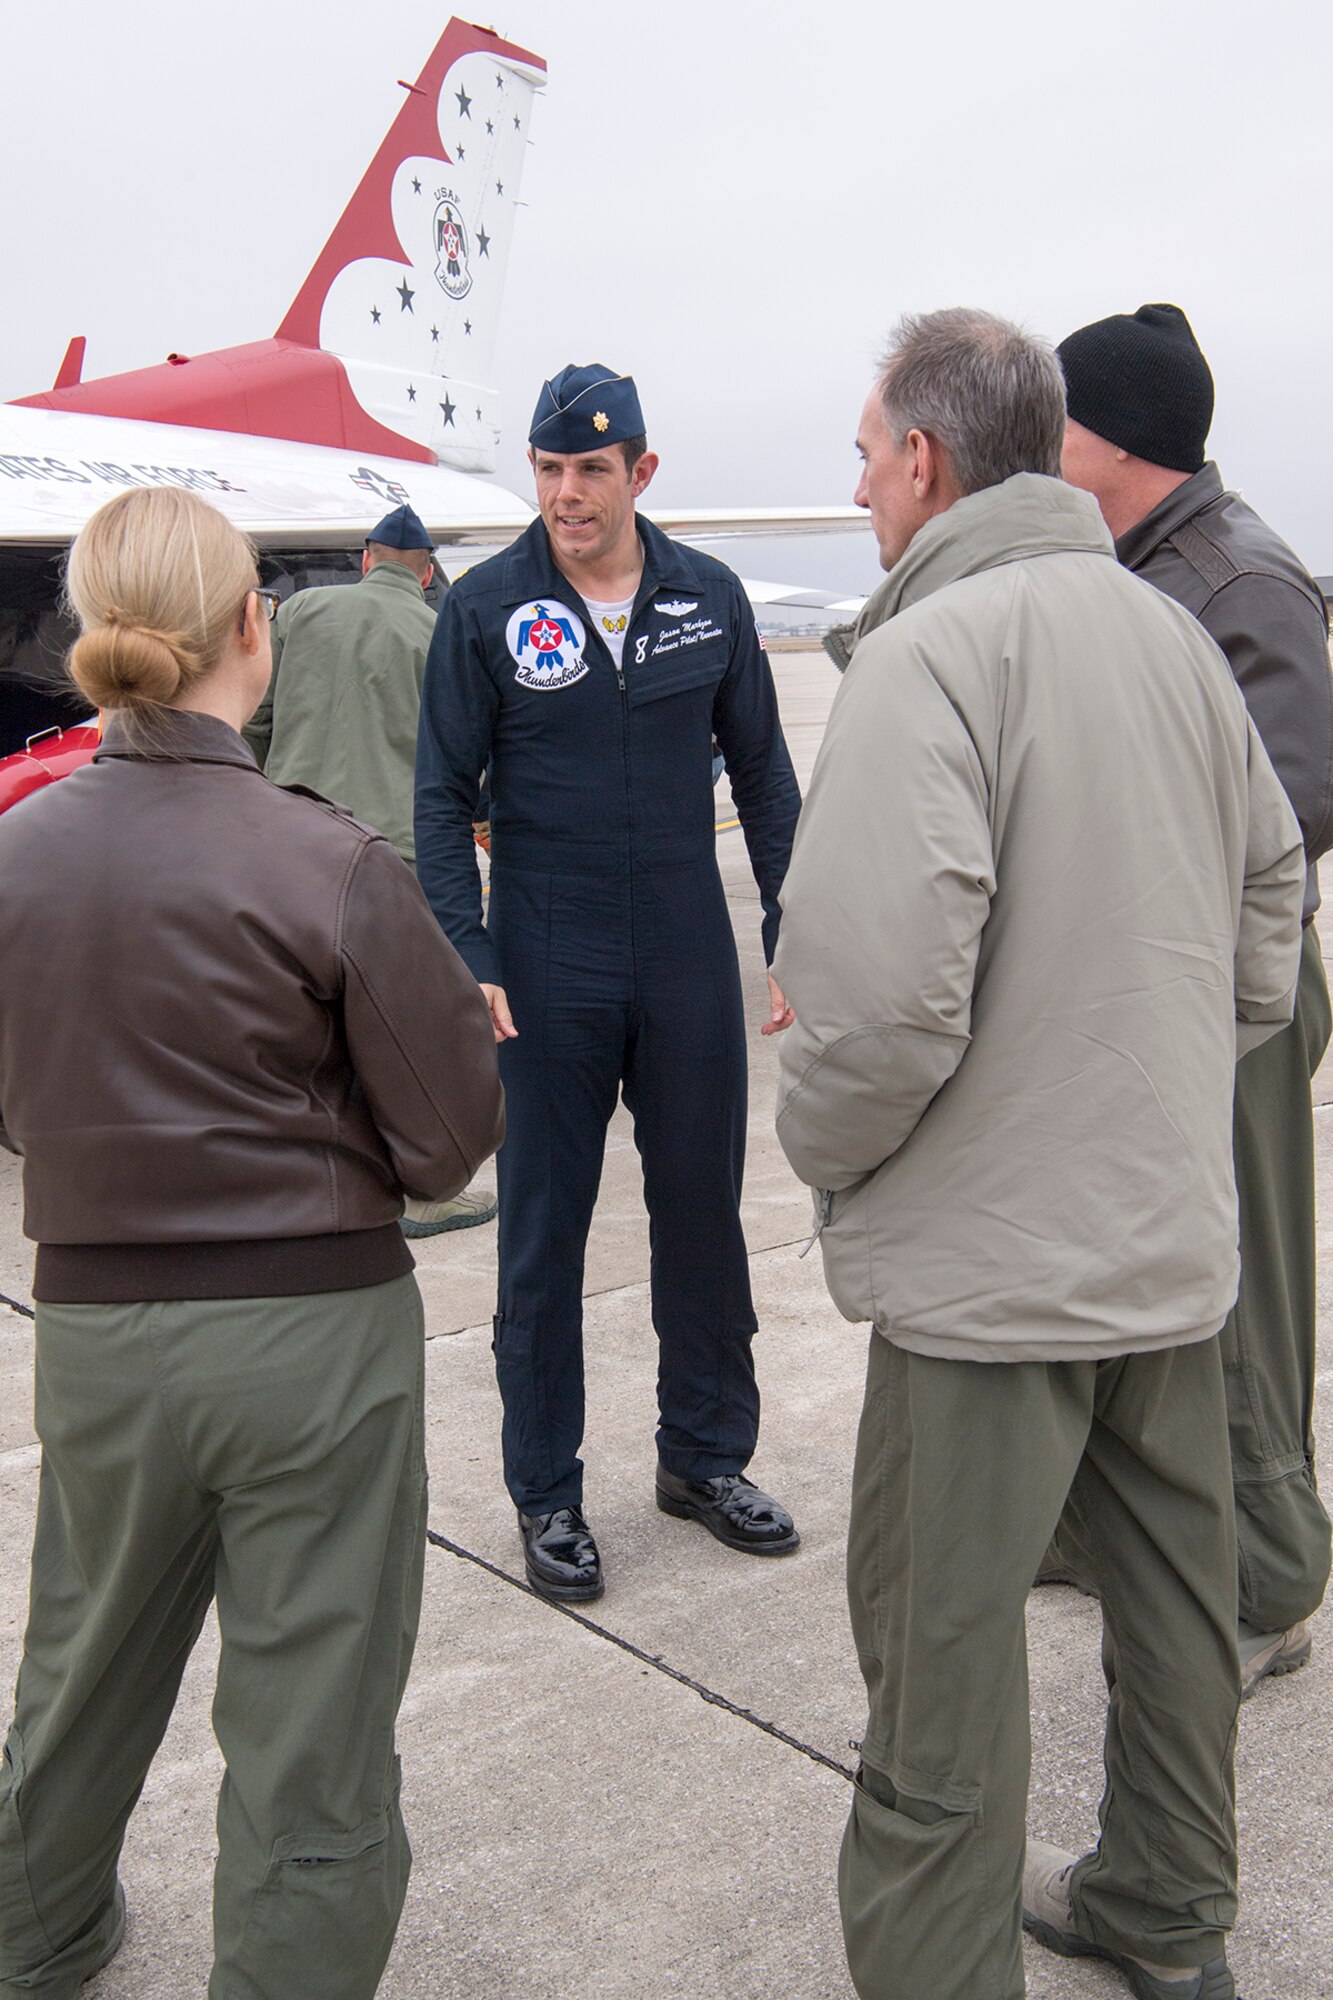 Maj. Jason Markzon, pilot of Thunderbird 8, talks with Grissom members upon his landing at Grissom Air Reserve Base, Ind., Feb. 5, 2019. Markzon visited the base in preparation for the Grissom Air and Space Expo scheduled for Sept. 7-8, 2019. (U.S. Air Force photo/Douglas Hays)